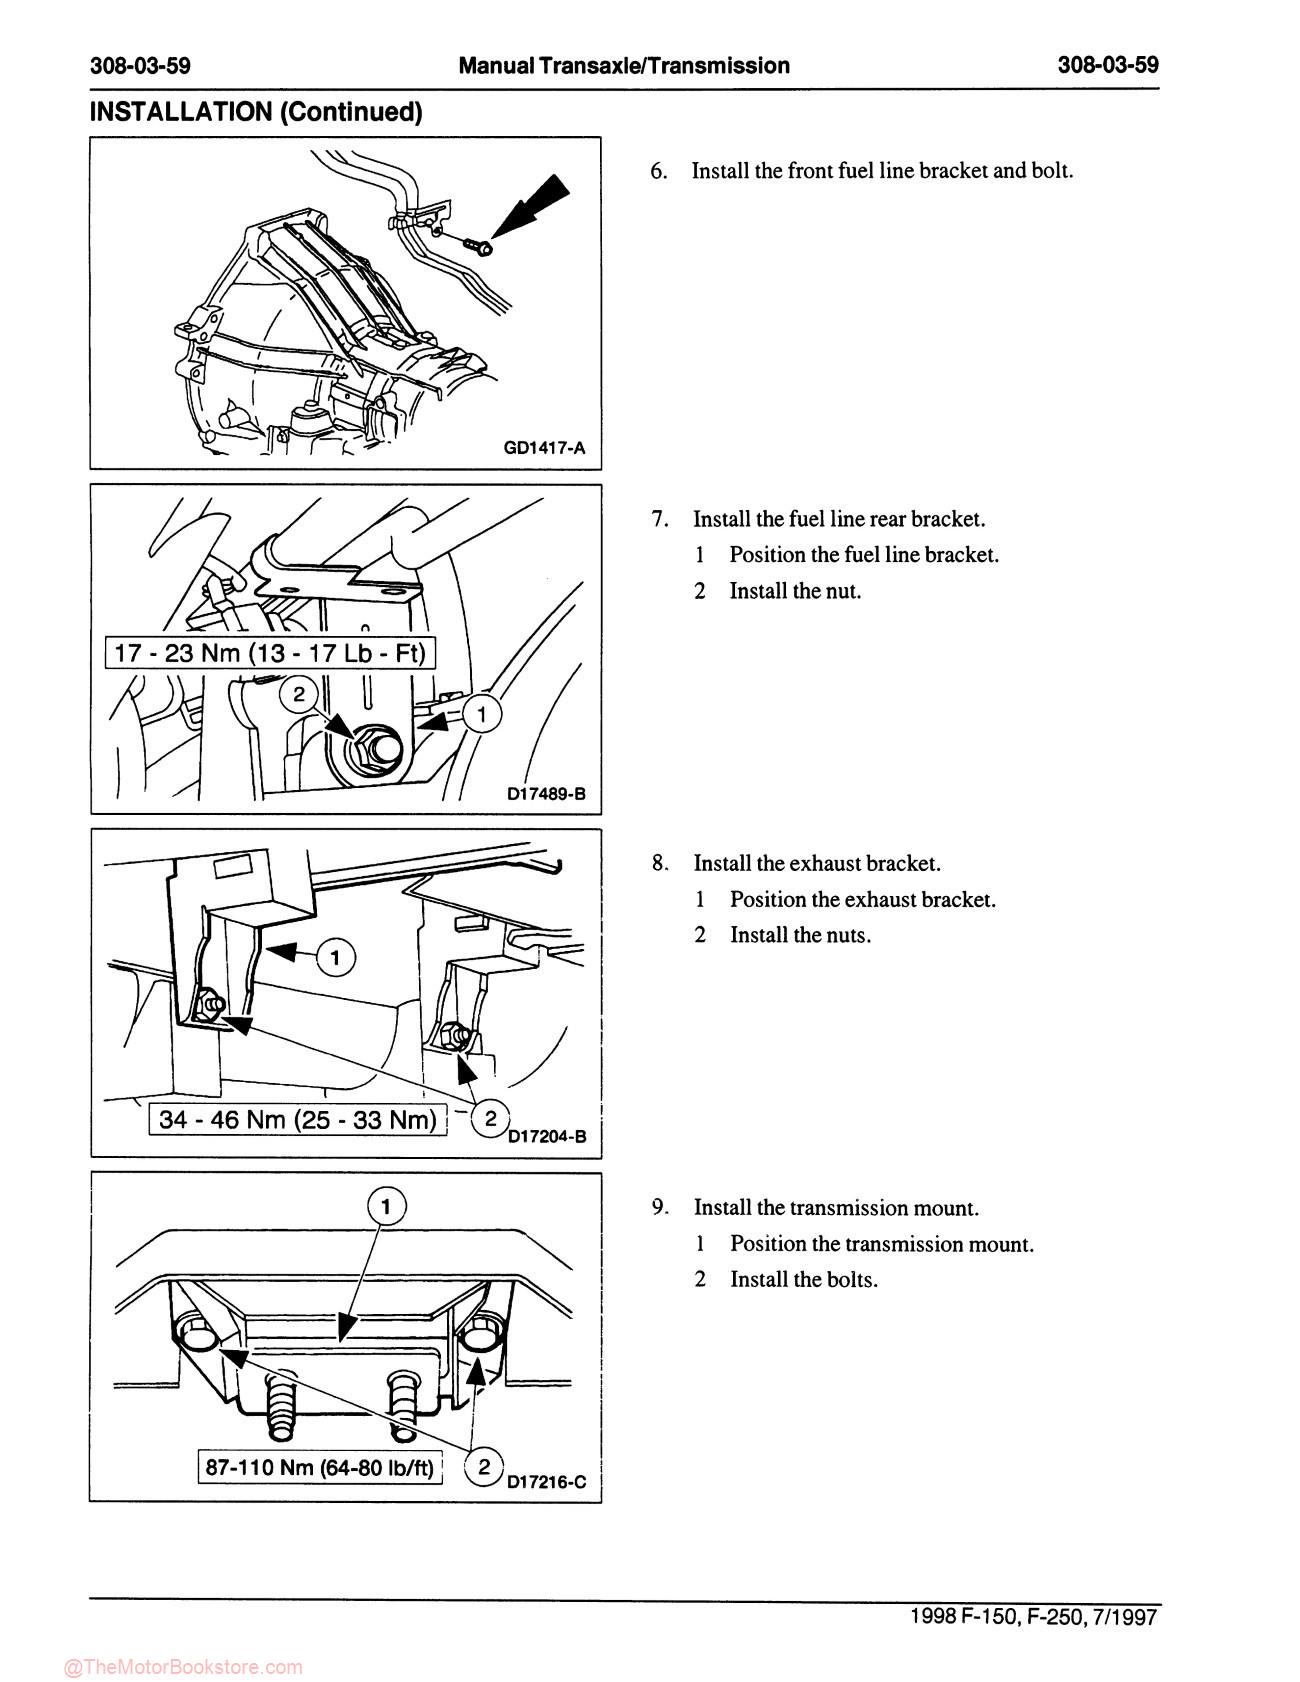 1998 Ford F-150, F-250 Truck Workshop Manual - Sample Page 6